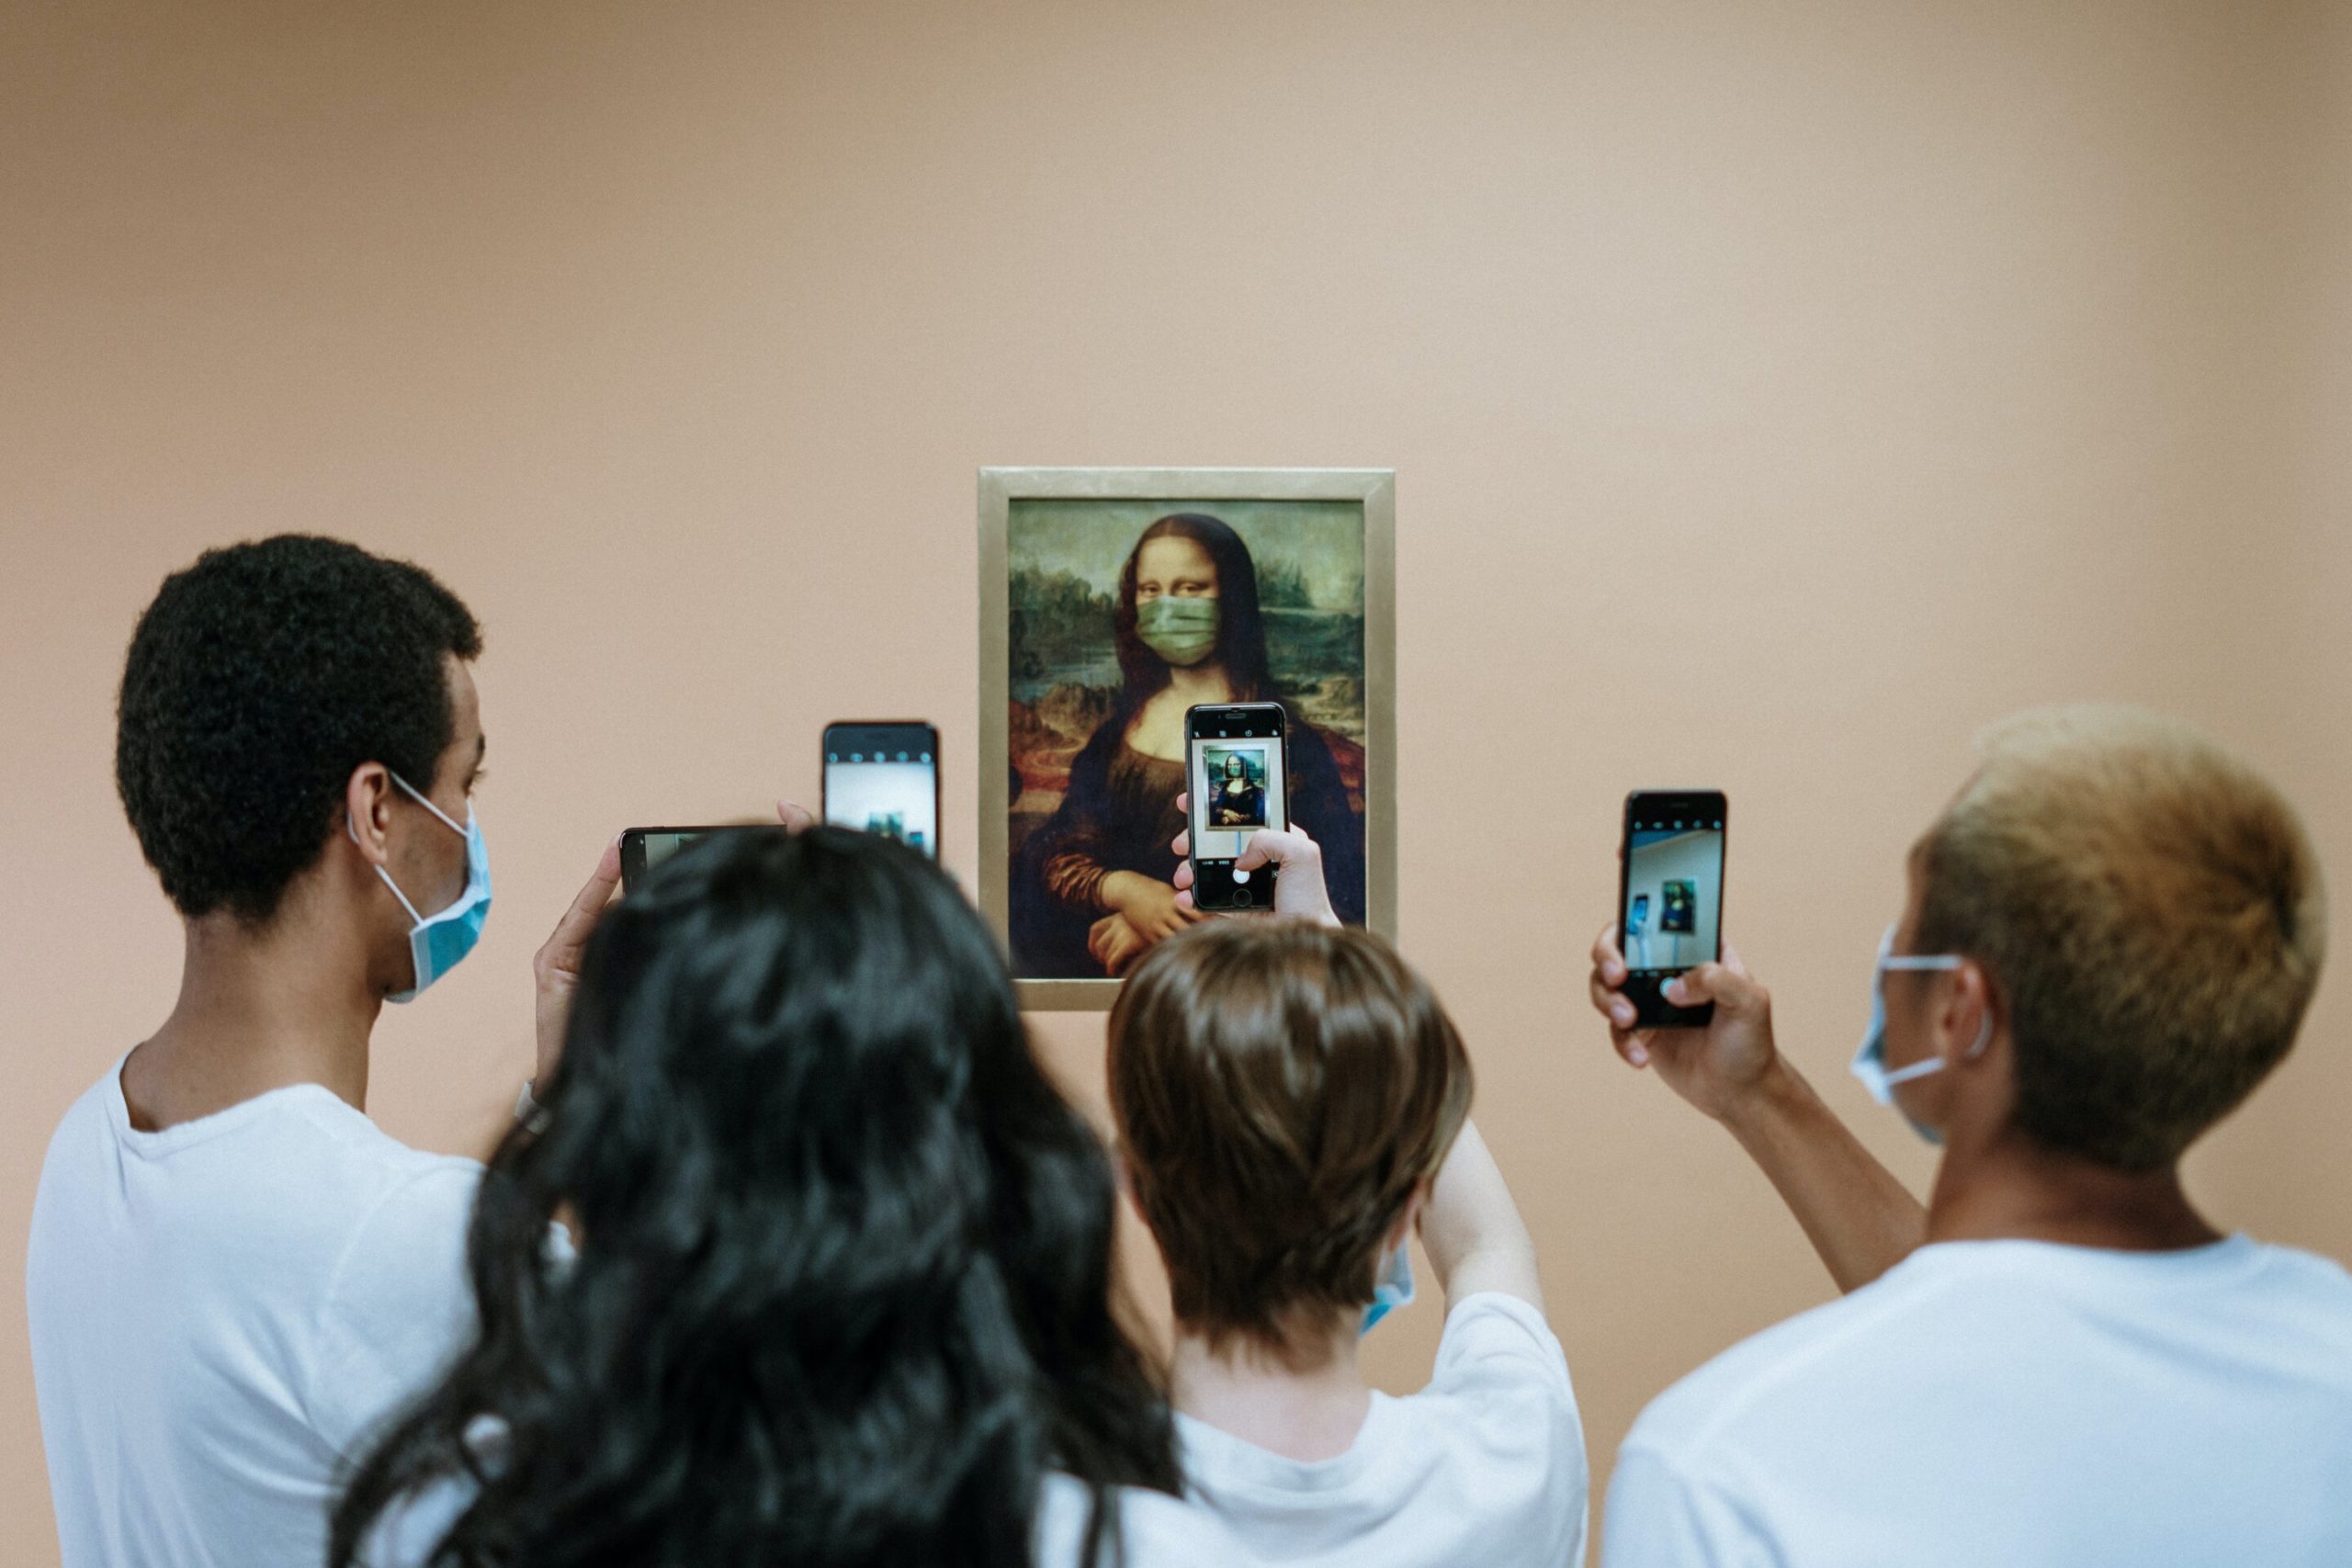 Teenagers want interactive technology in museums, research finds